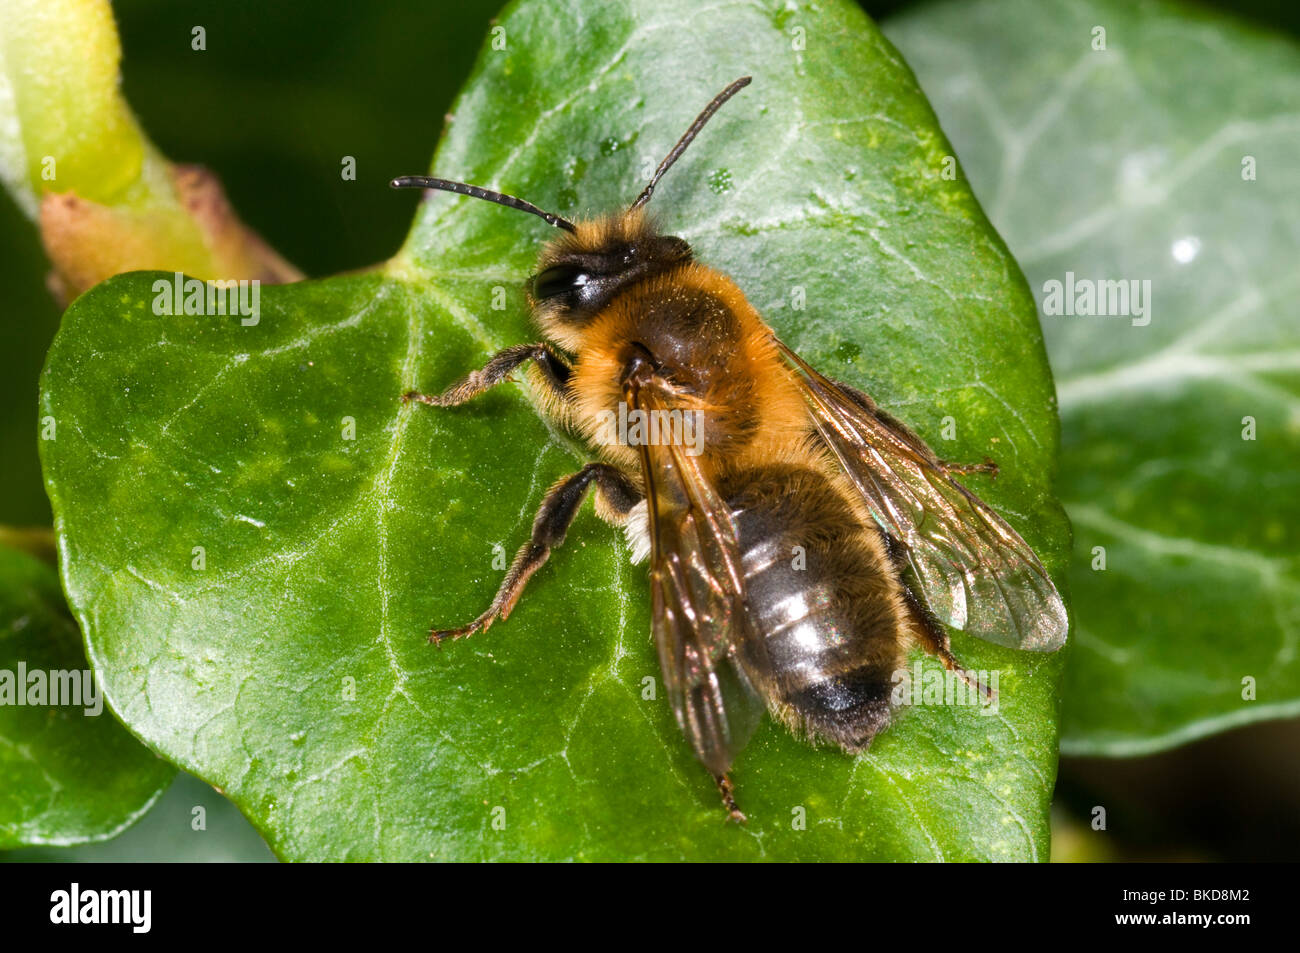 A mining bee, Andrena nitida, at rest on a leaf Stock Photo